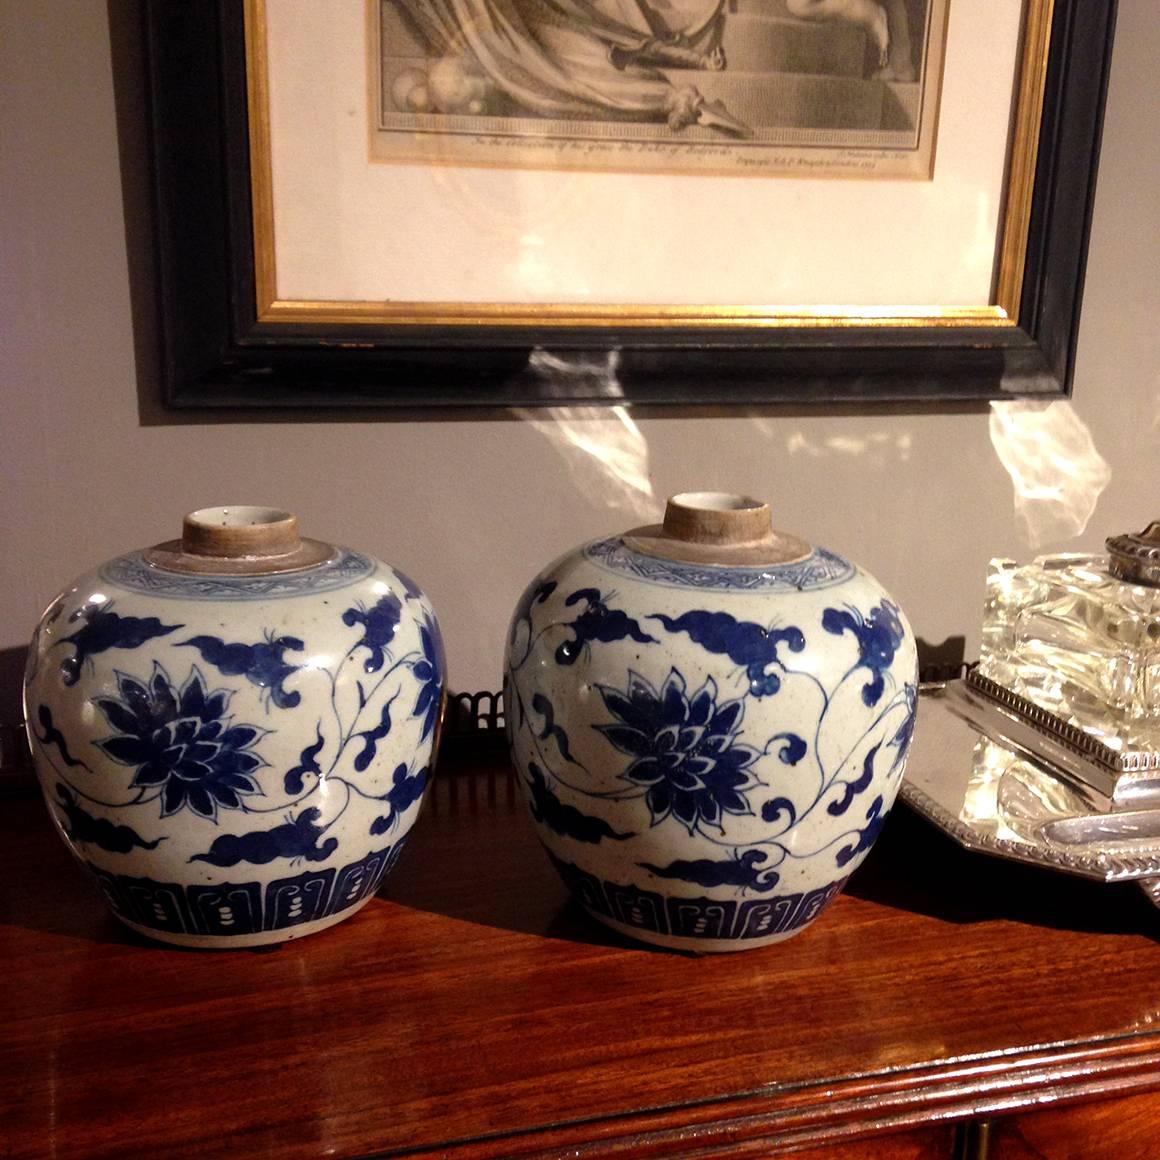 This lovely pair of Guangxu period blue and white porcelain melon jars is finely decorated with a flowering branch motif.